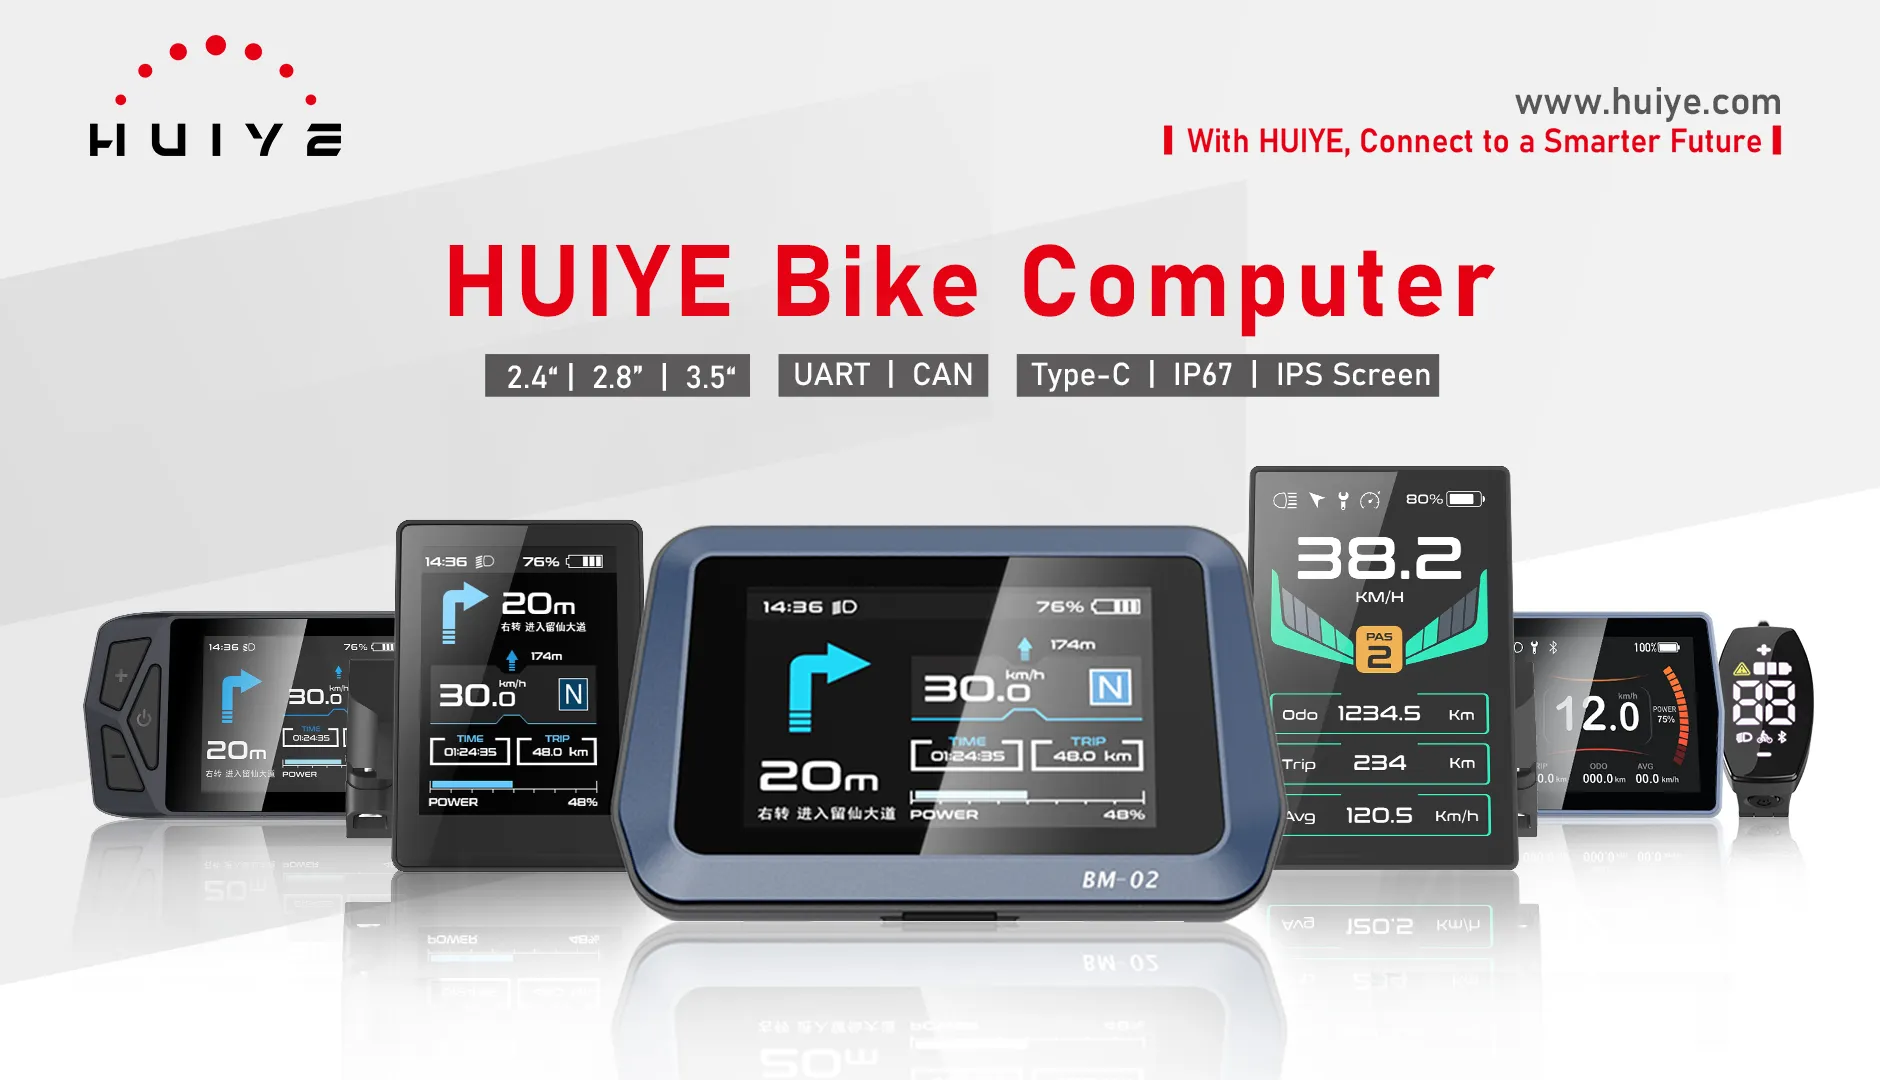 HUIYE bike computer promoting green and low-carbon travel.